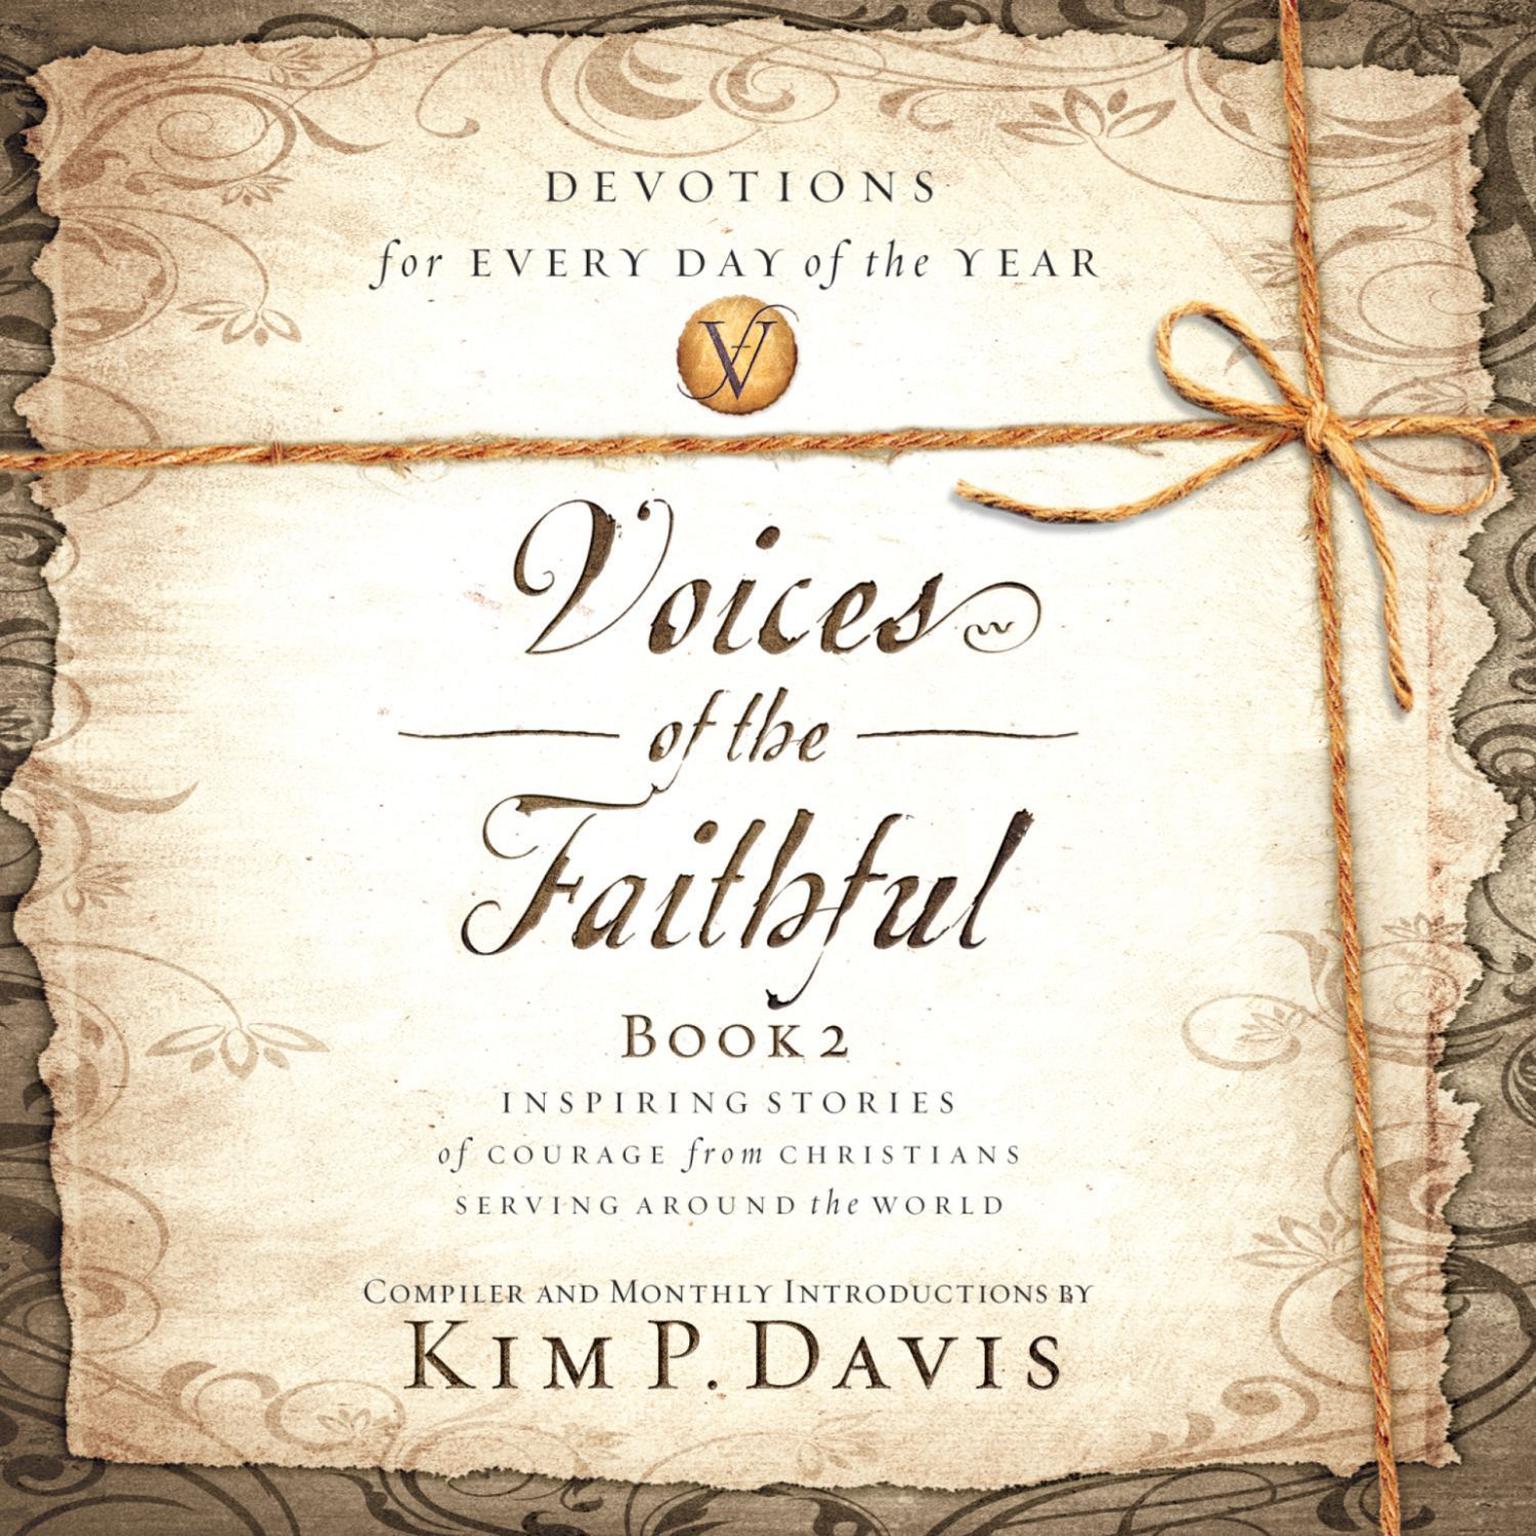 Voices of the Faithful - Book 2: Inspiring Stories of Courage from Christians Serving Around the World Audiobook, by Kim P. Davis